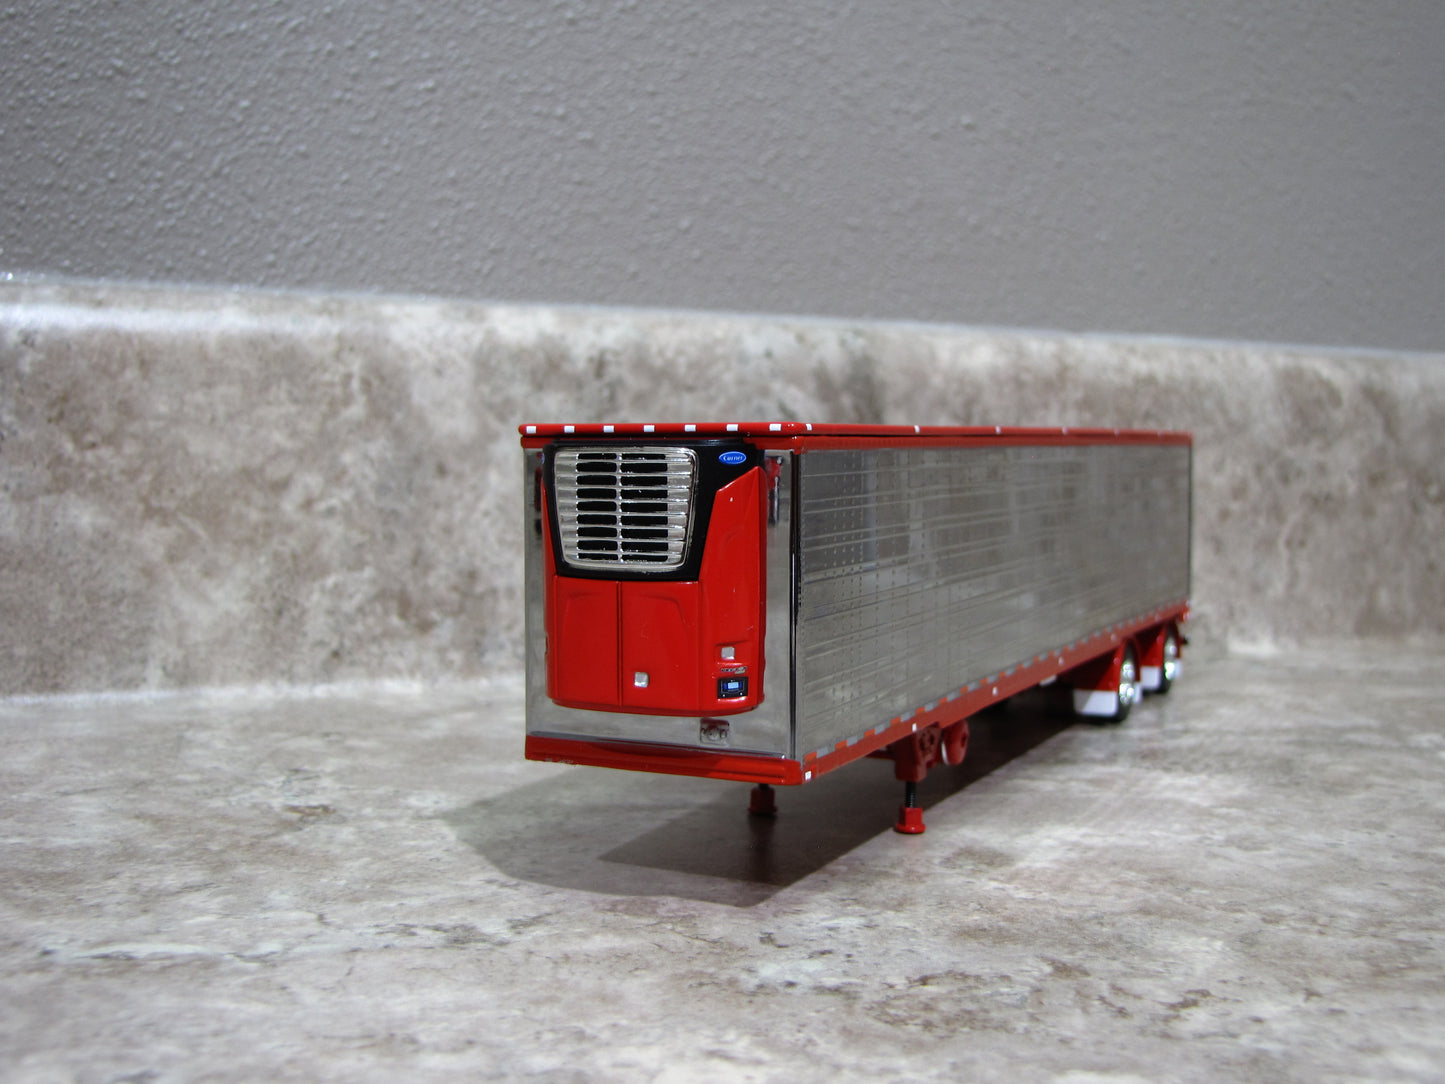 TRL 1324 Chrome Red Carrier Reefer Spread Axle Trailer